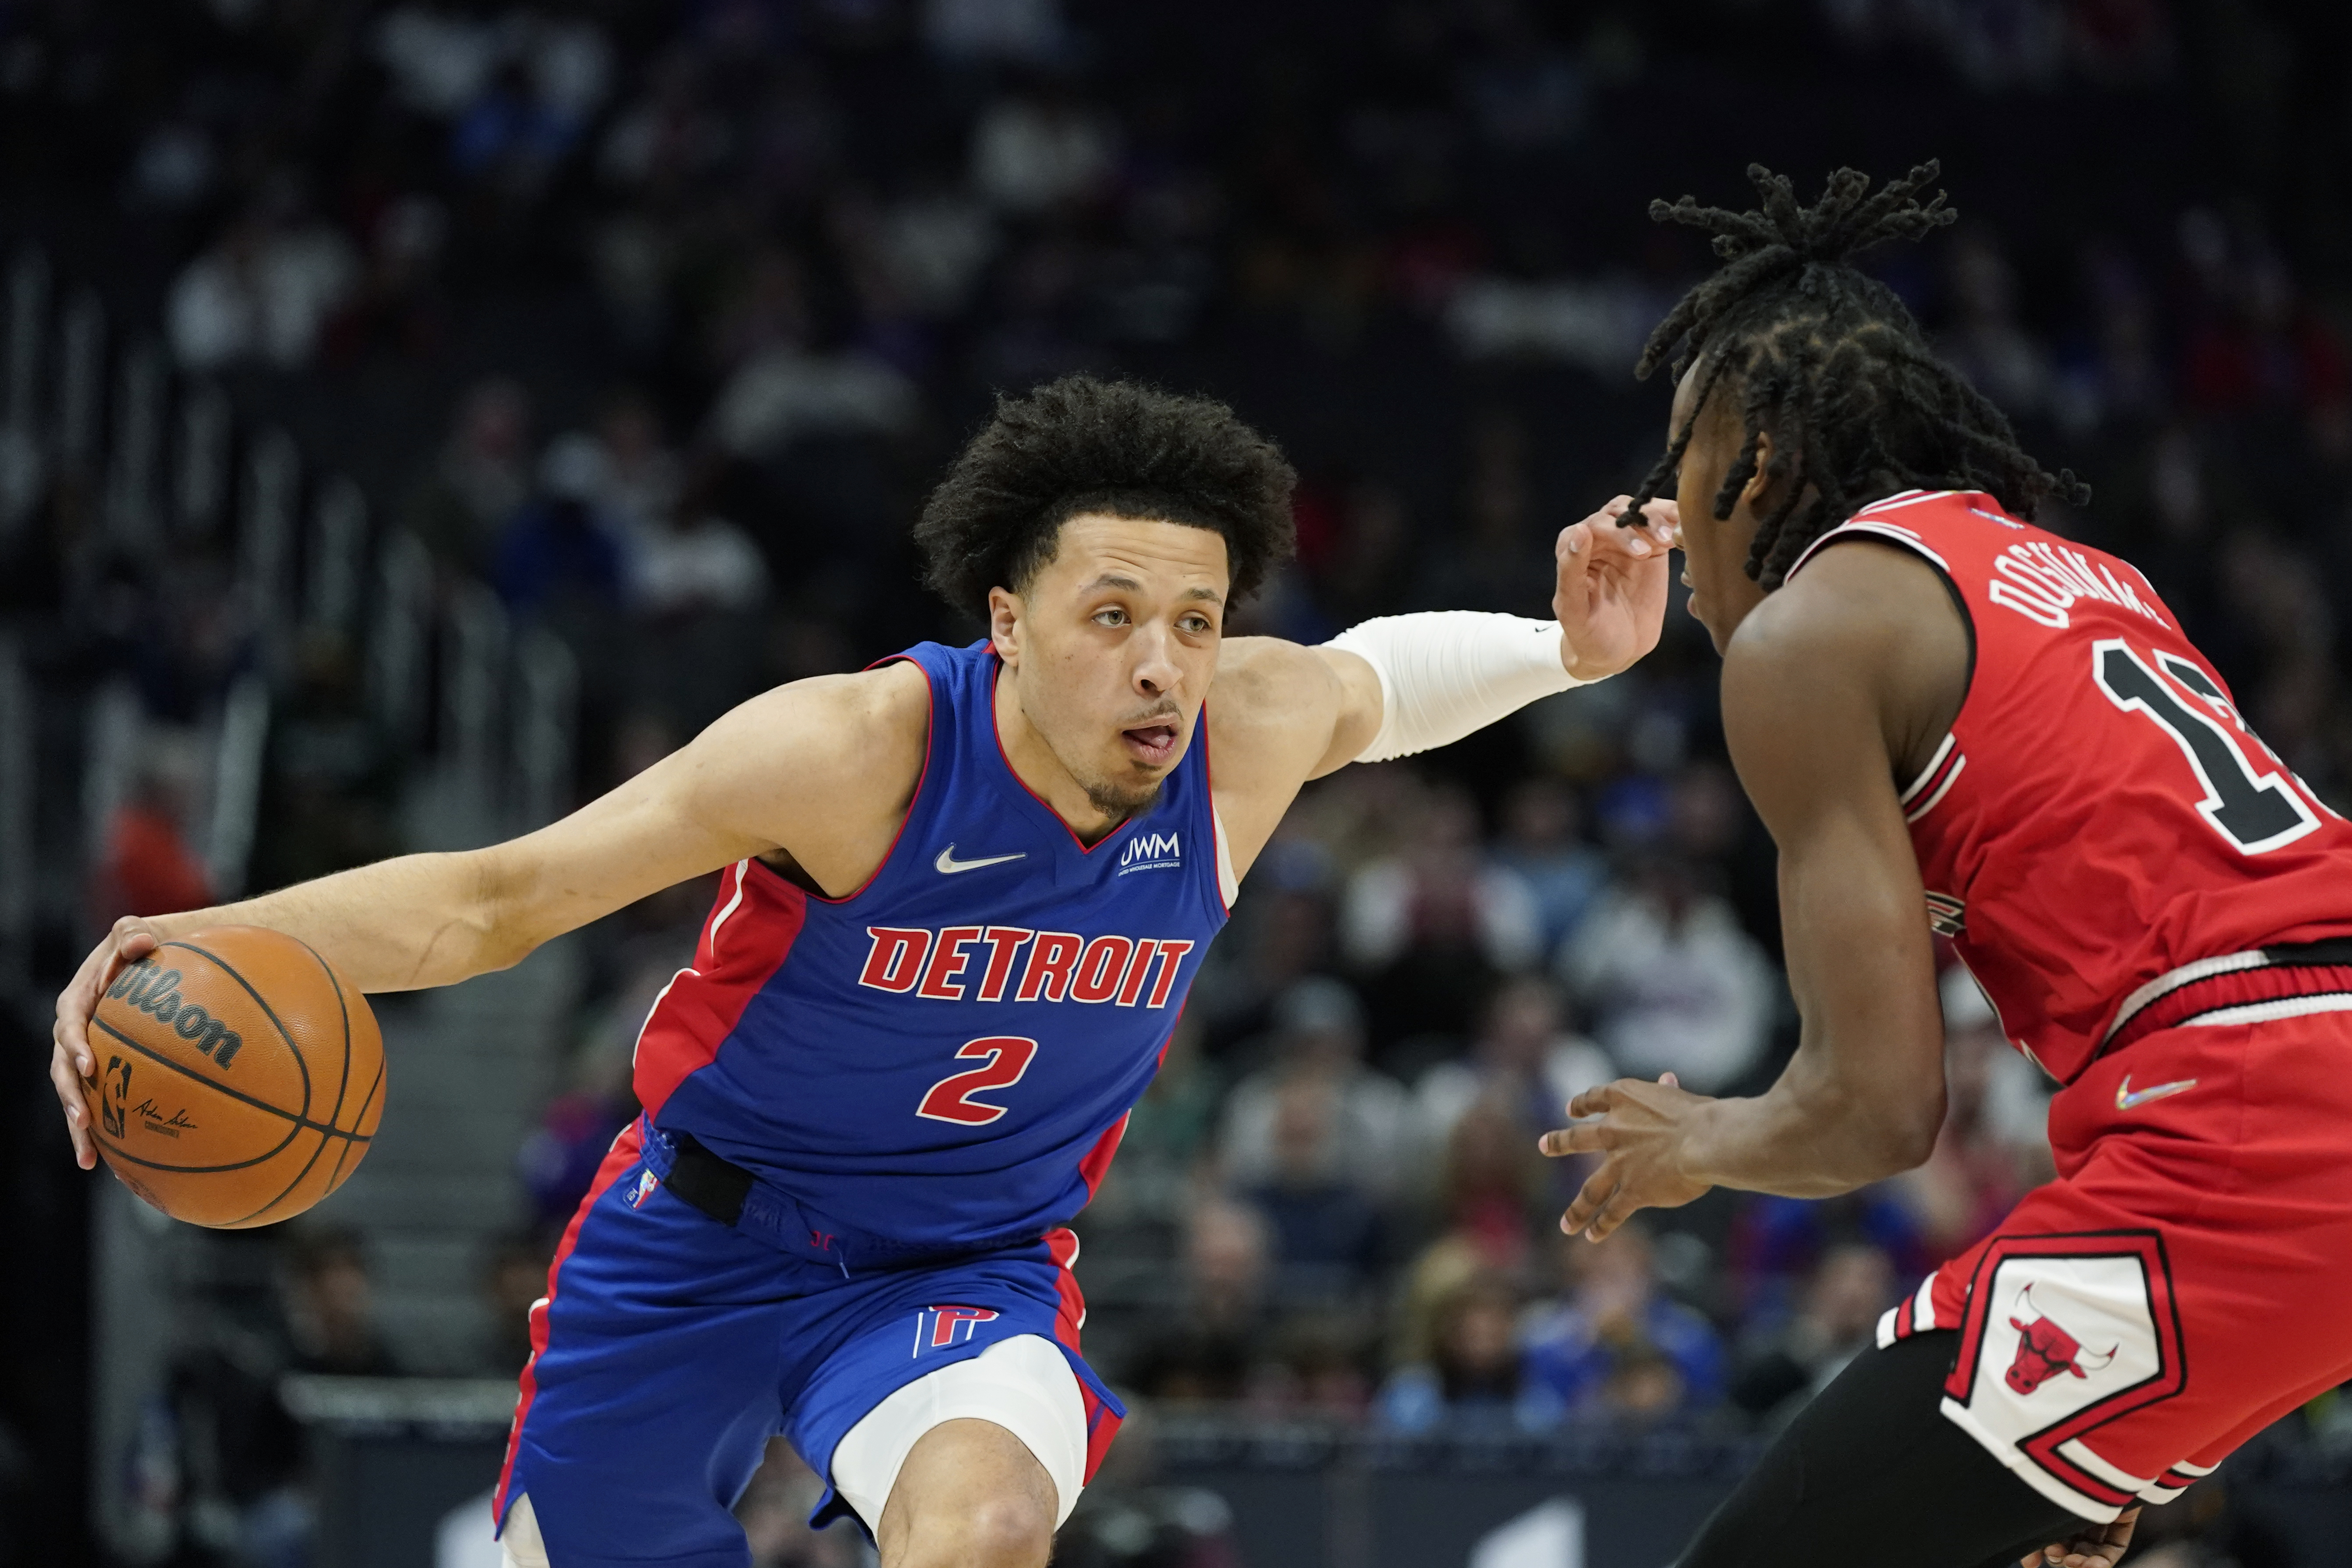 Detroit Pistons' offseason camaraderie could pay off big in 2023-24